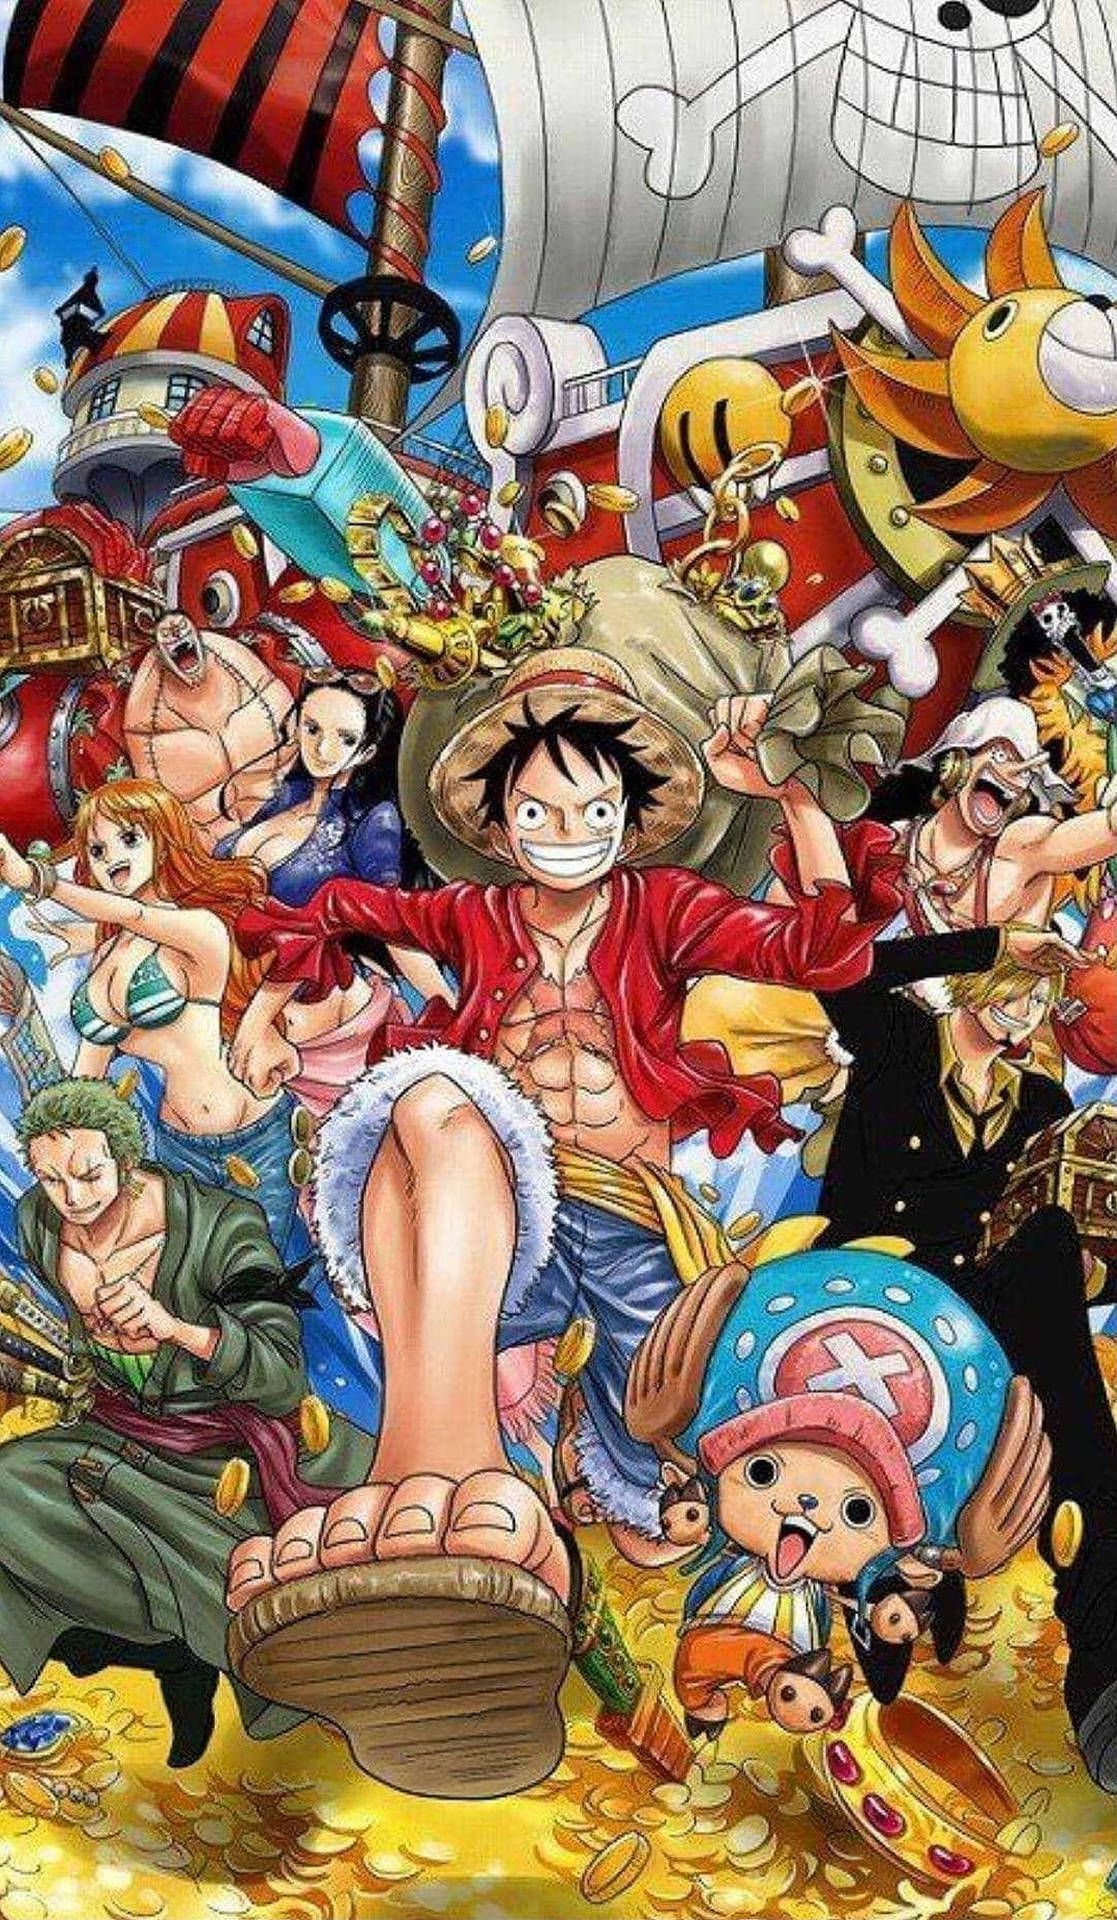 Free One Piece iPhone Wallpaper Downloads, One Piece iPhone Wallpaper for FREE